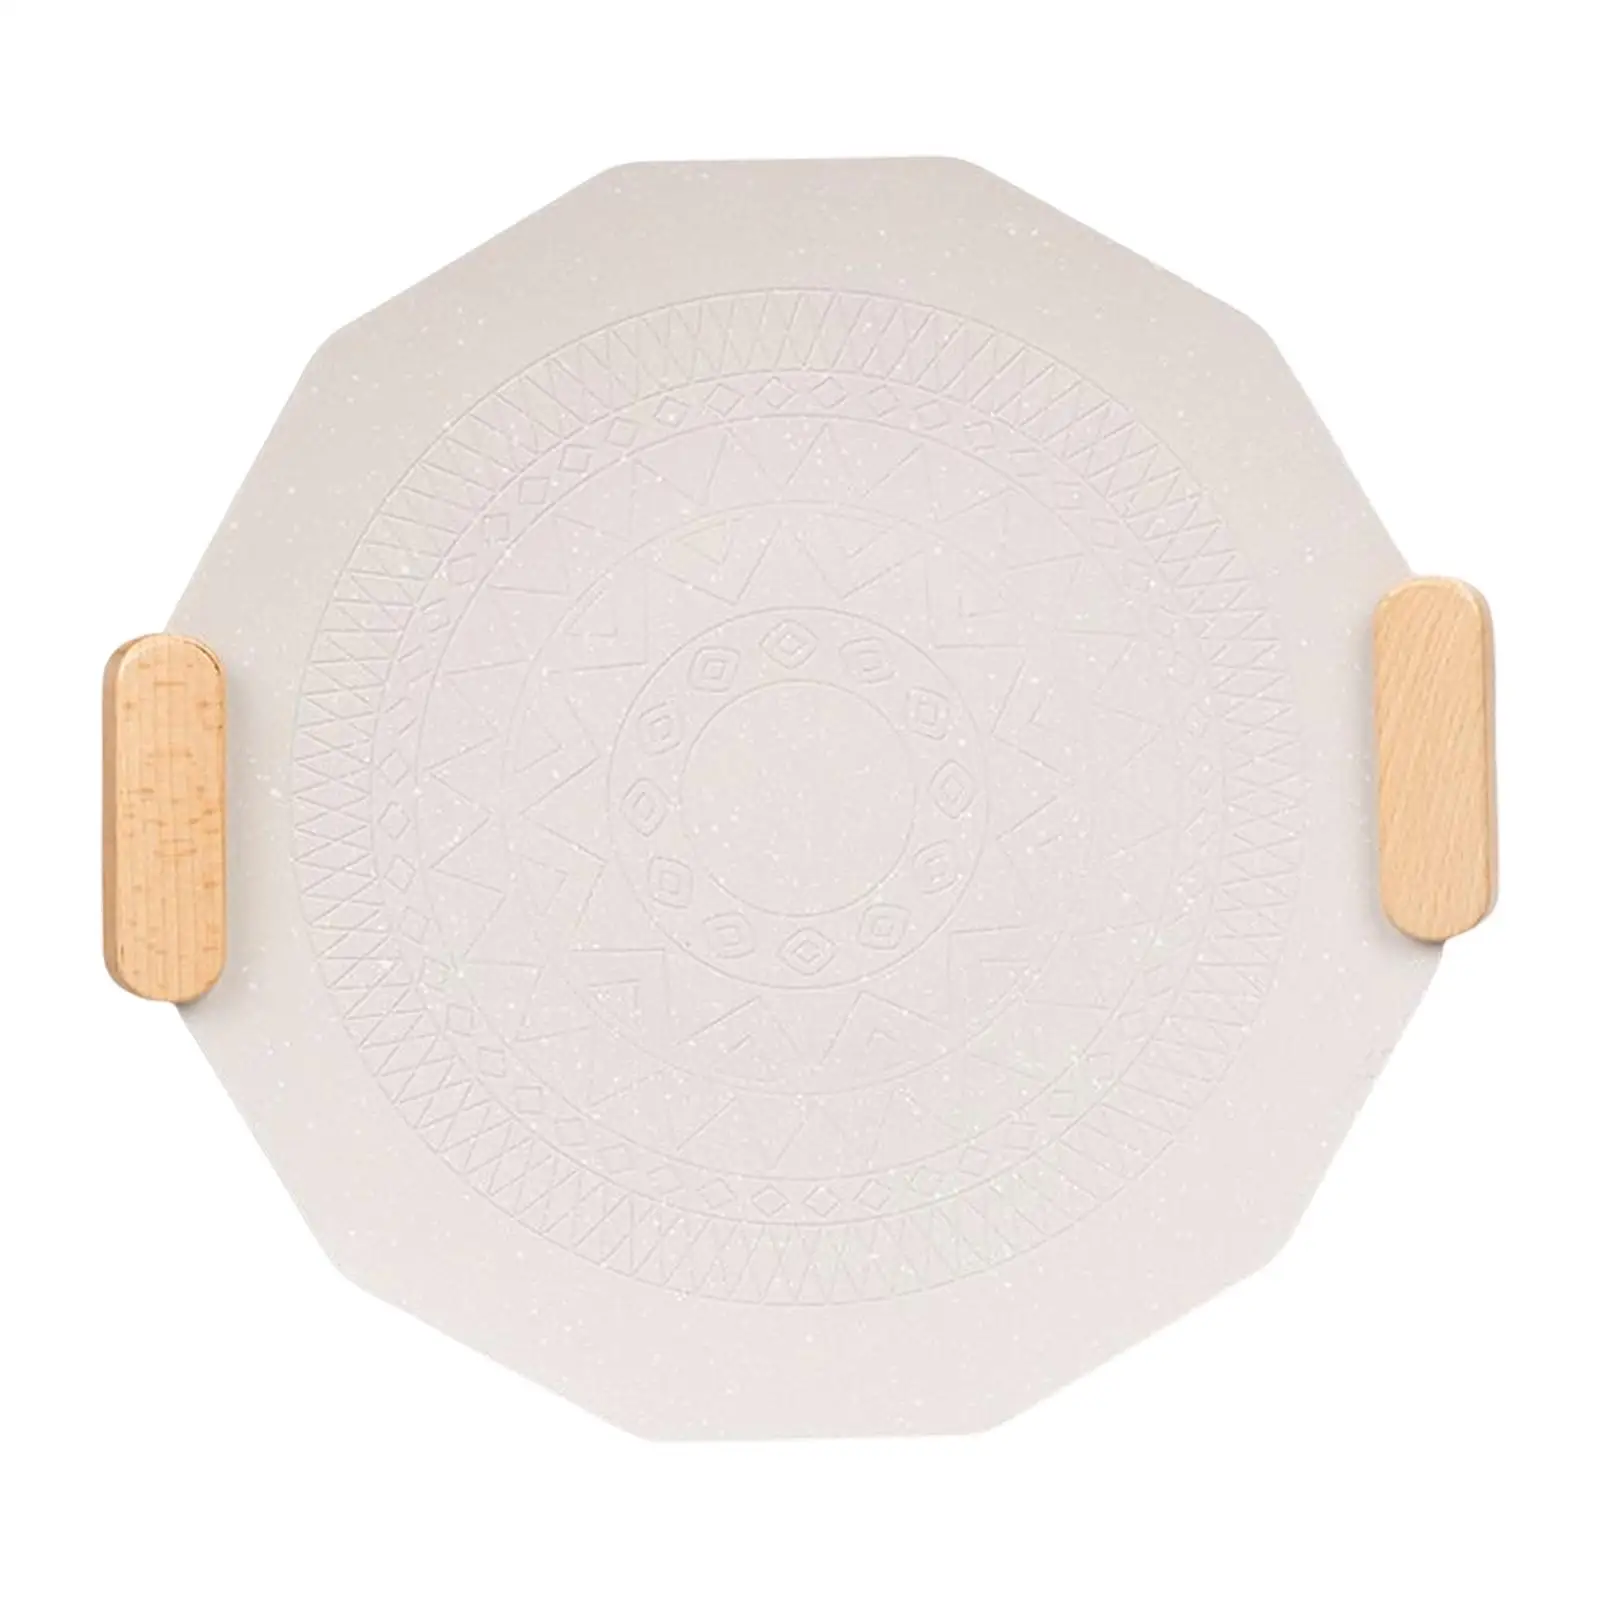 Multifunctional Barbecue Plate Wooden Handles Durable 38cm Cookware Korean Style